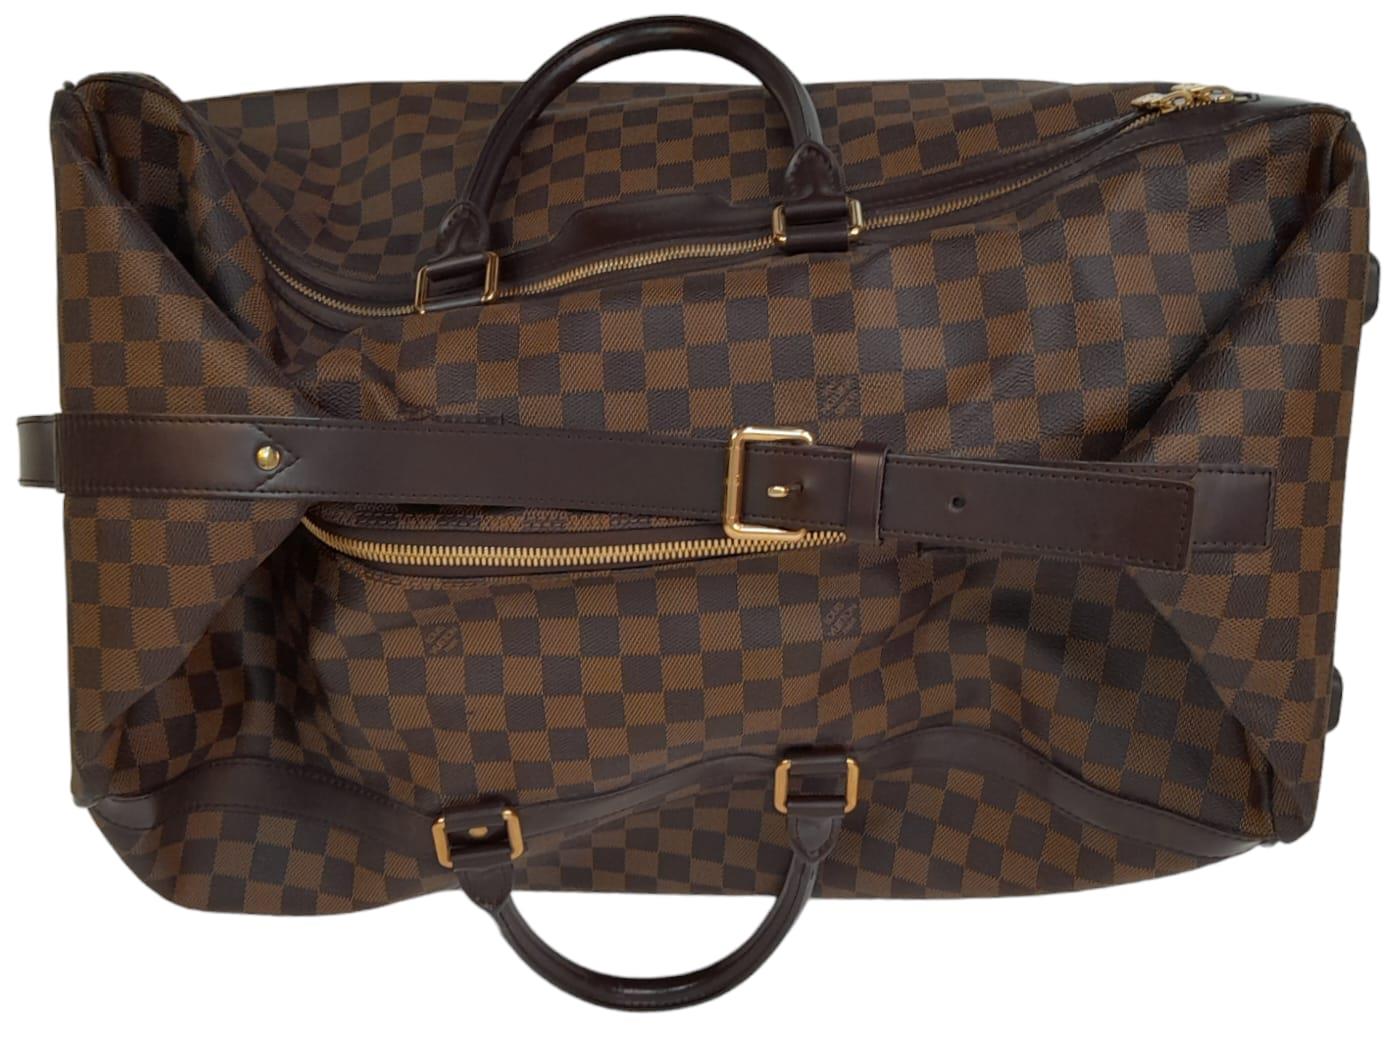 A Louis Vuitton Damier Ebene Eole Convertible Travel Bag. Leather exterior with gold-toned hardware, - Image 2 of 10